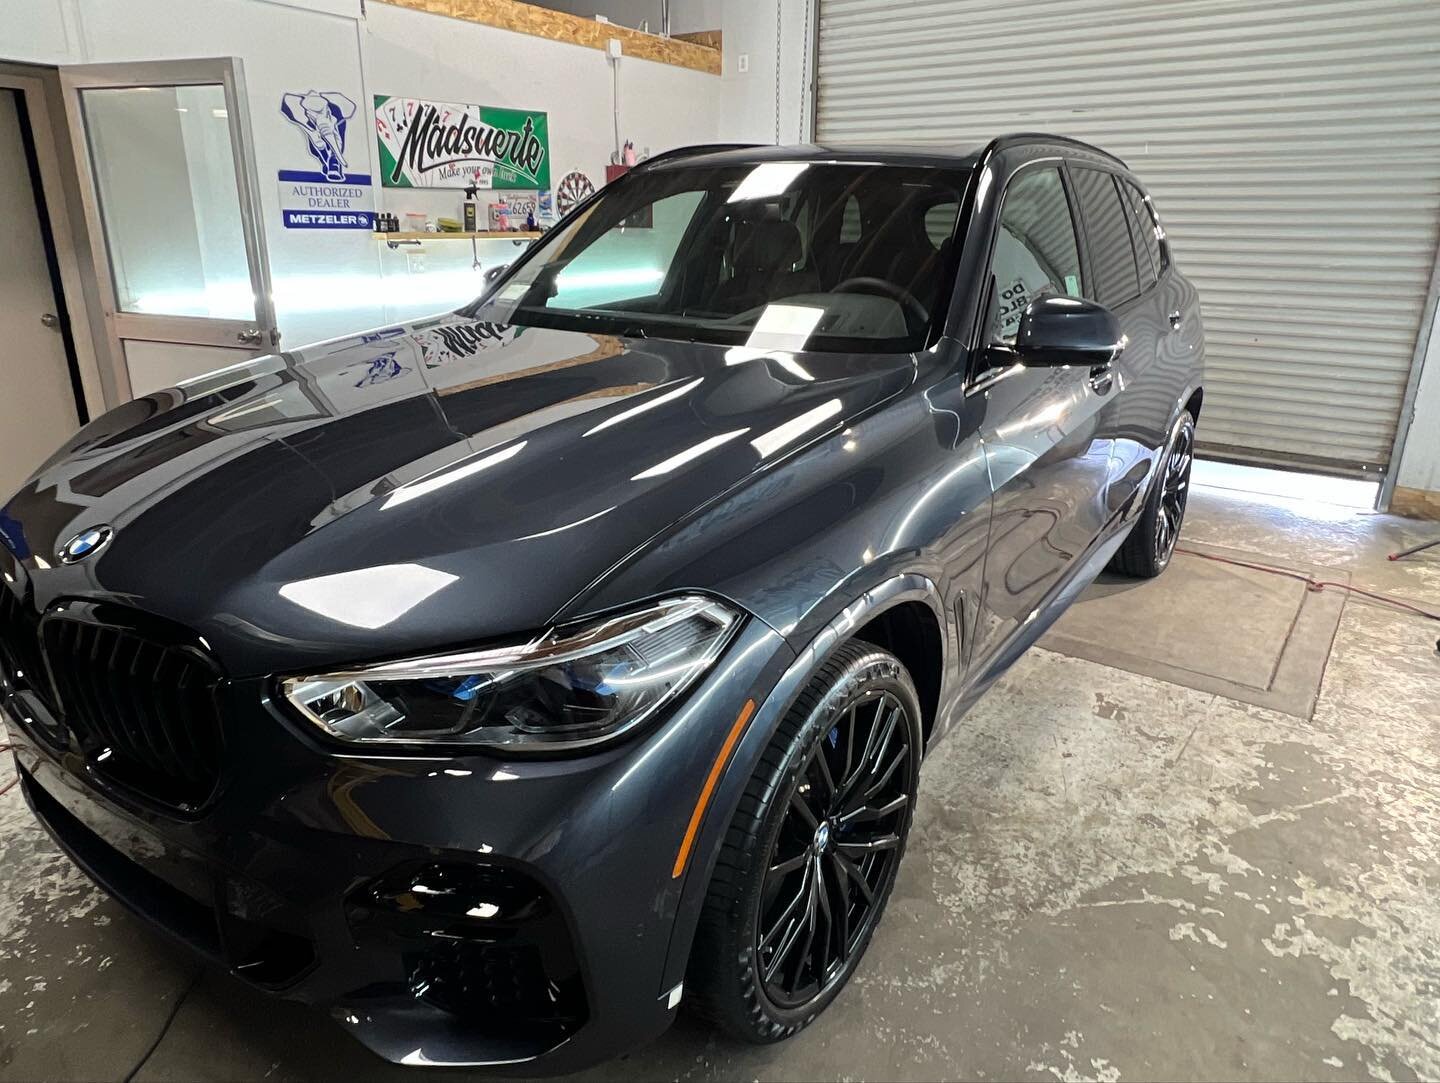 Bmw fresh out the dealer, received our LVL 3 Polish+ Ceramic Coating 💎
Last pic is the before 🙏

Ceramic Coating helps with 
-extremely hydrophobic 
-extra gloss (donut glaze)
-super easy maintenance 
-longevity protection from bad uv ray and road 